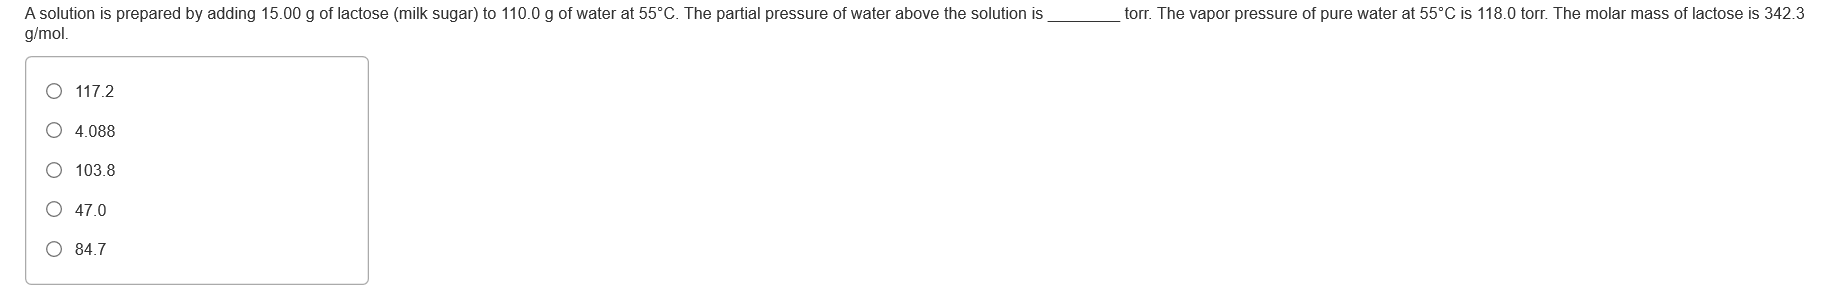 A solution is prepared by adding 15.00 g of lactose (milk sugar) to 110.0 g of water at 55°C. The partial pressure of water above the solution is
g/mol.
torr. The vapor pressure of pure water at 55°C is 118.0 torr. The molar mass of lactose is 342.3
O 117.2
O 4.088
O 103.8
O 47.0
O 84.7
